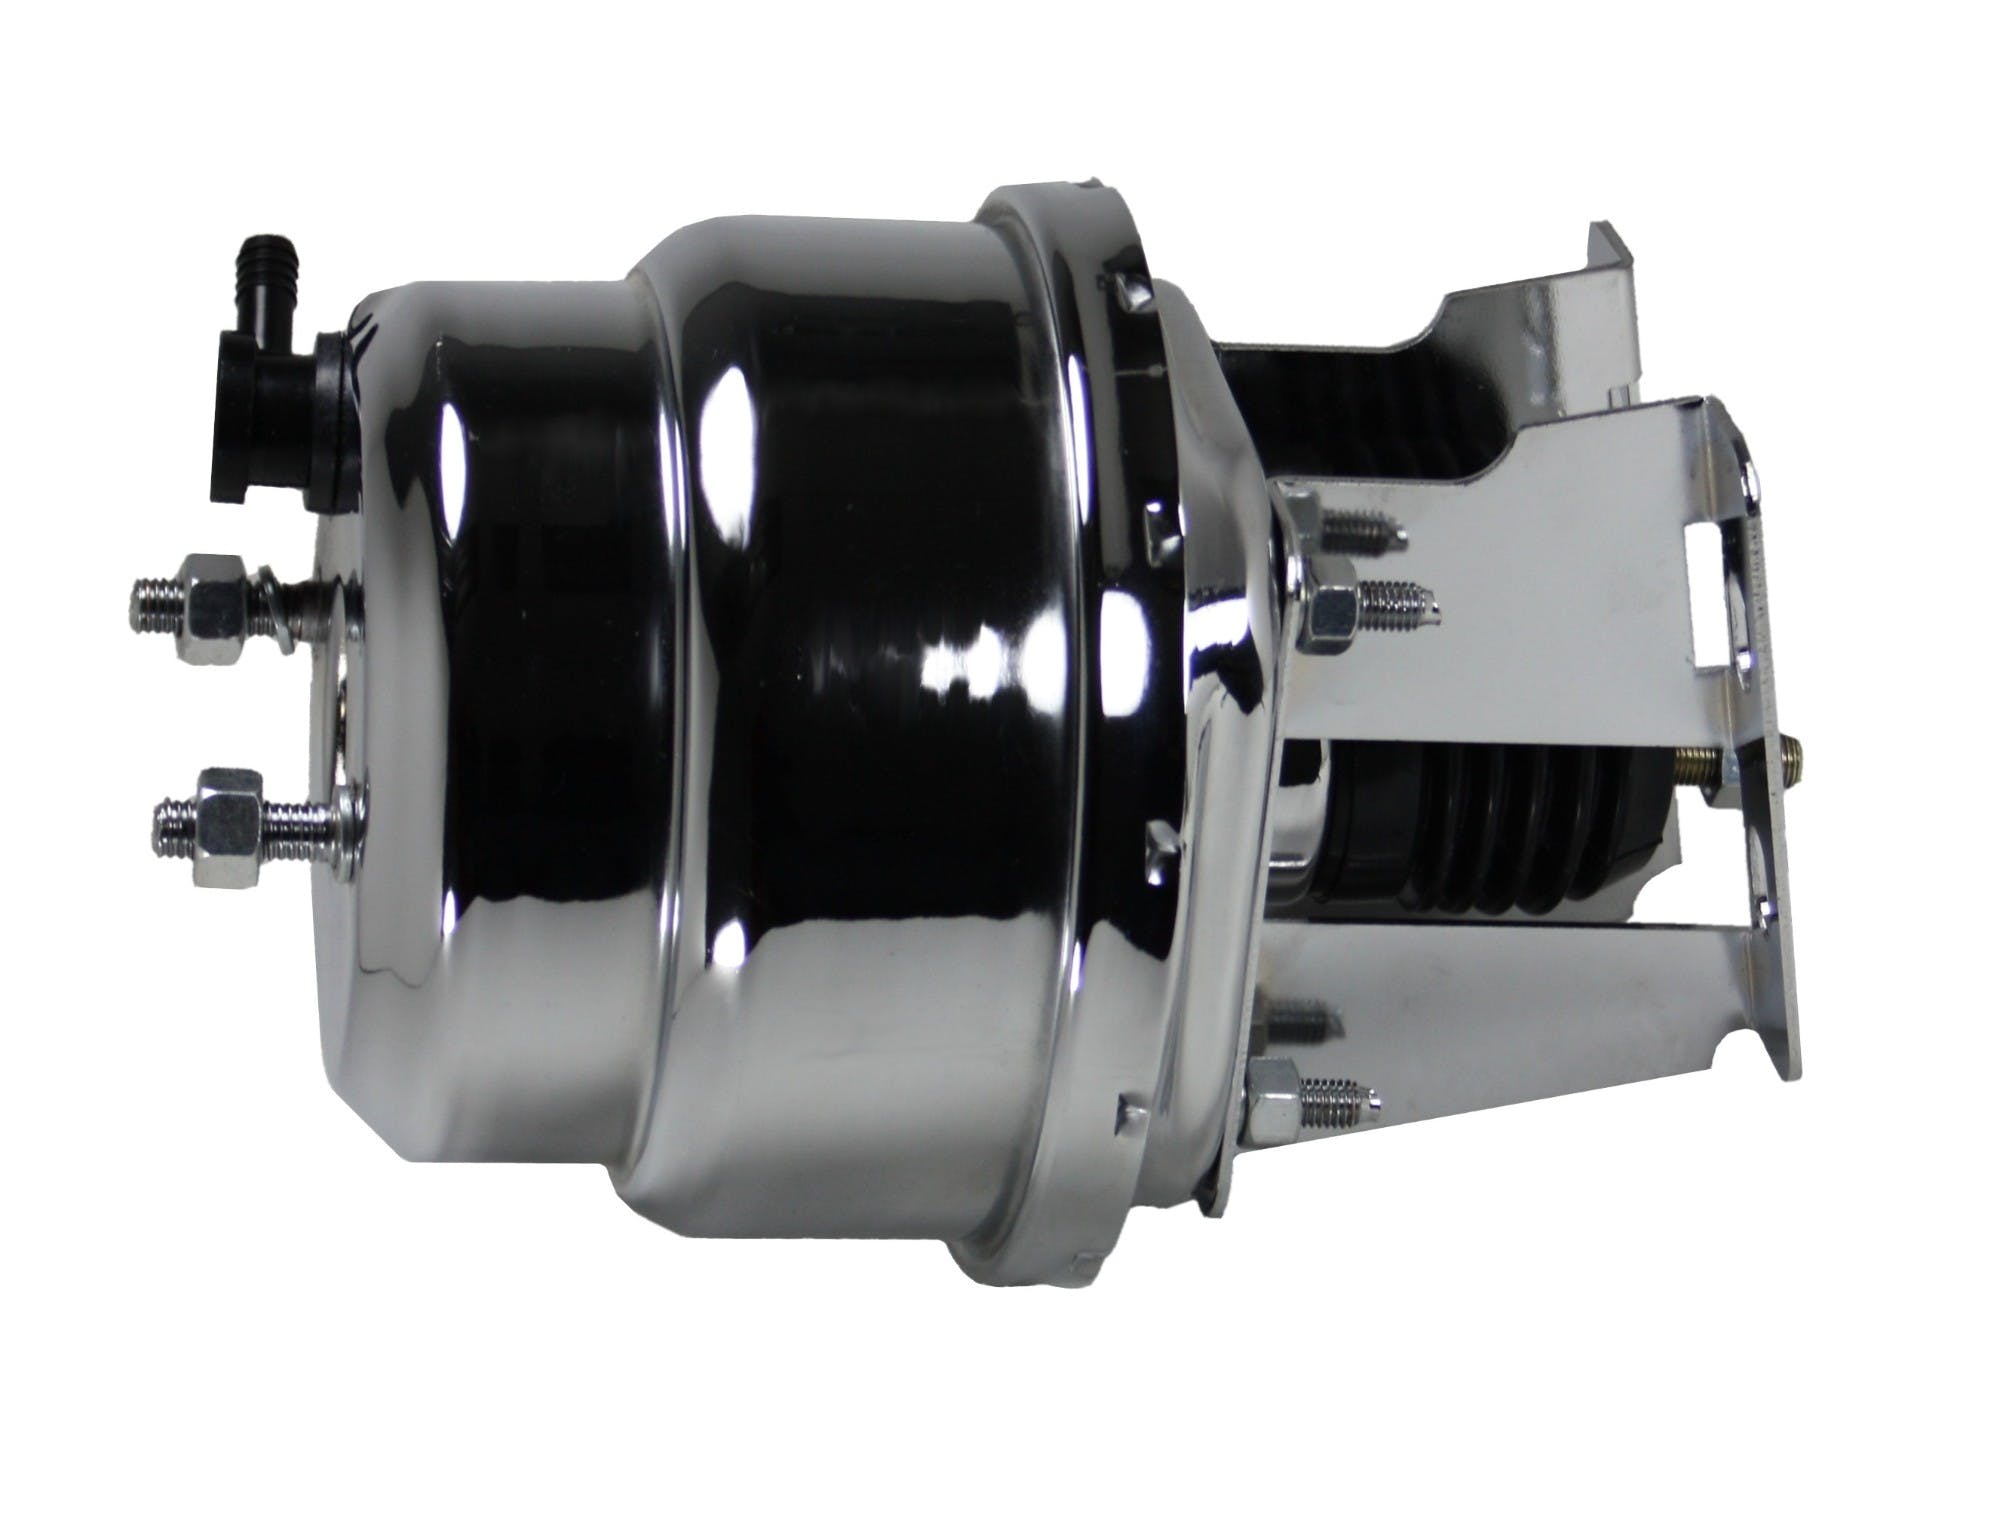 LEED Brakes 4T6B2 7 in Dual Power Booster ,1-1/8in Bore, side valve disc/drum (Chrome)